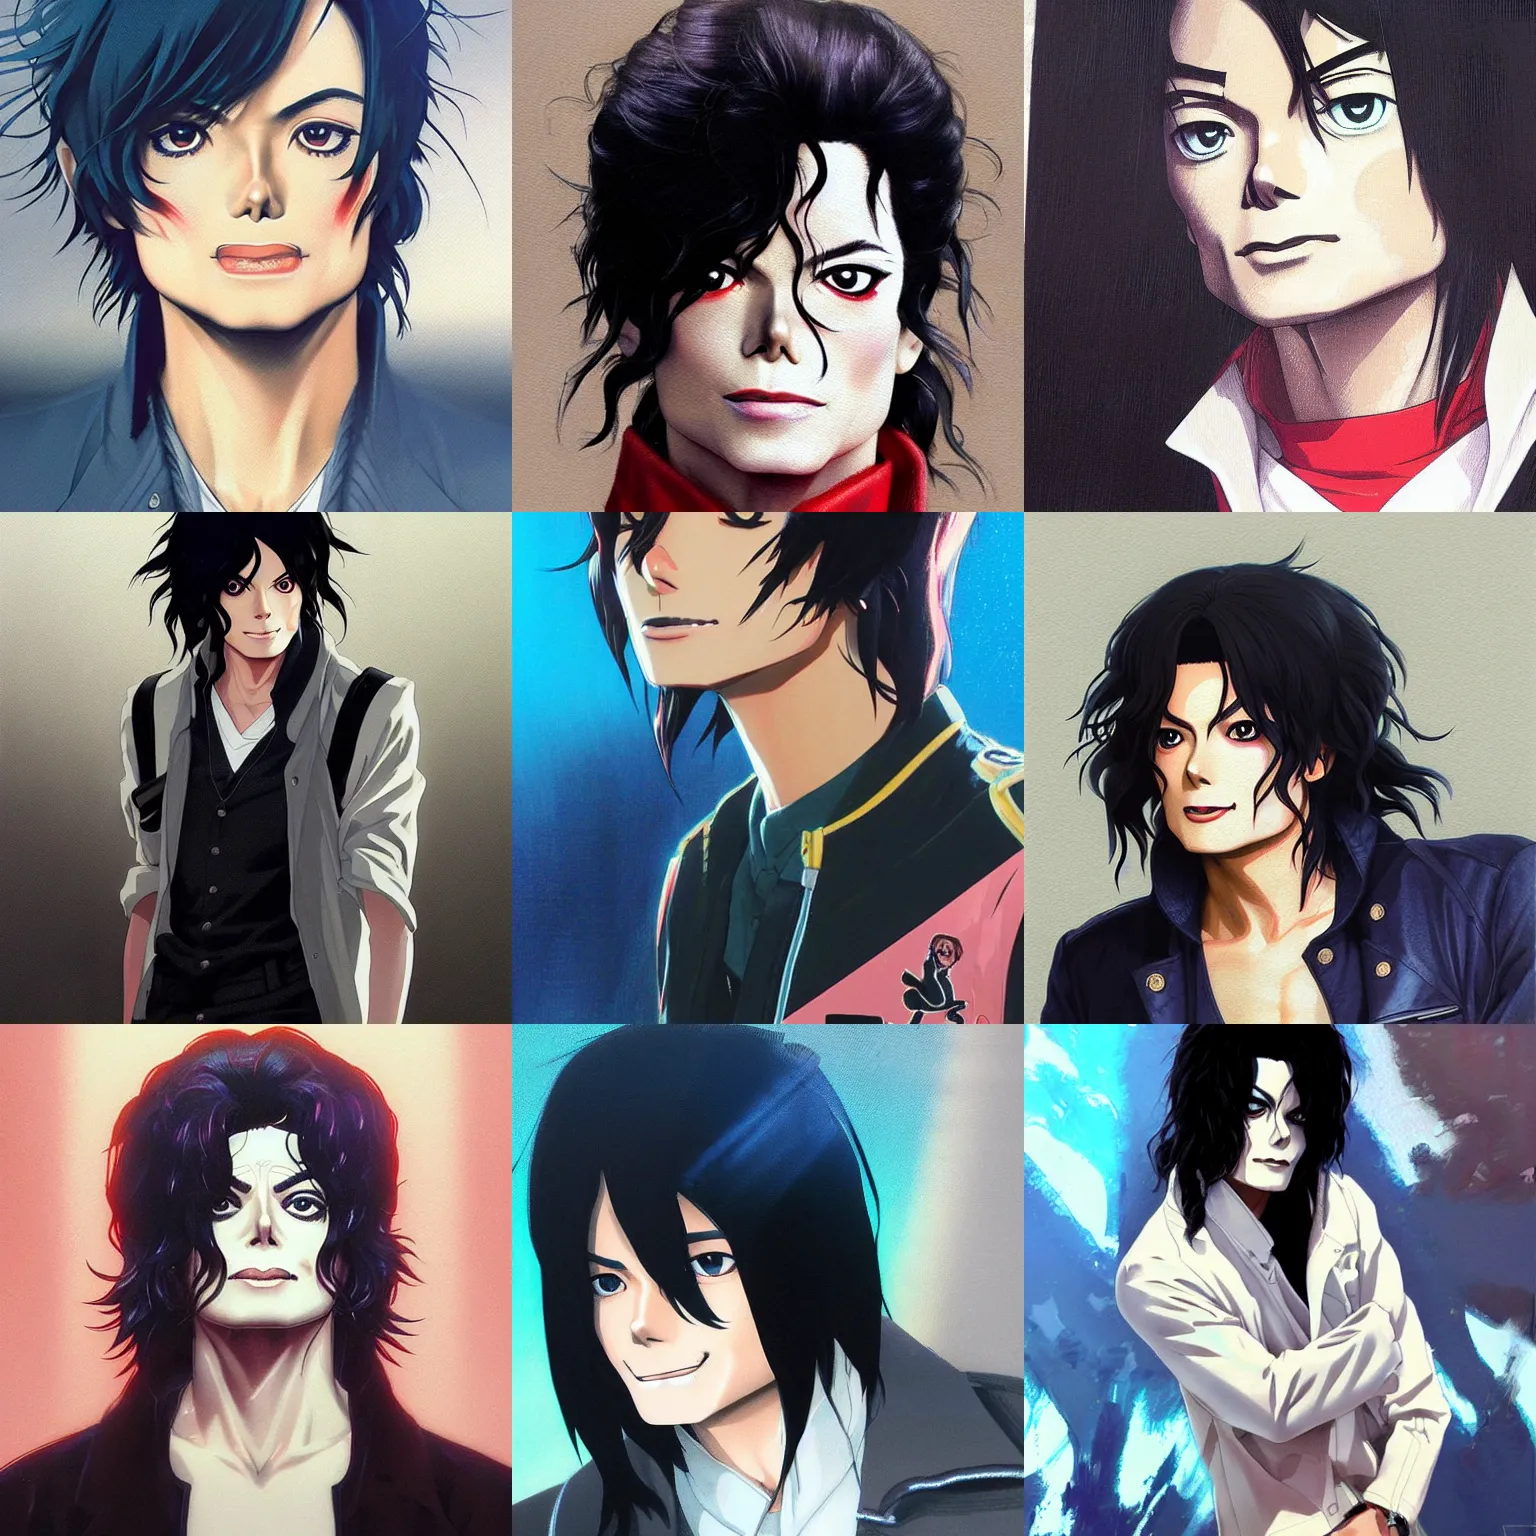 Michael Jackson in the anime by GamTimArt on DeviantArt